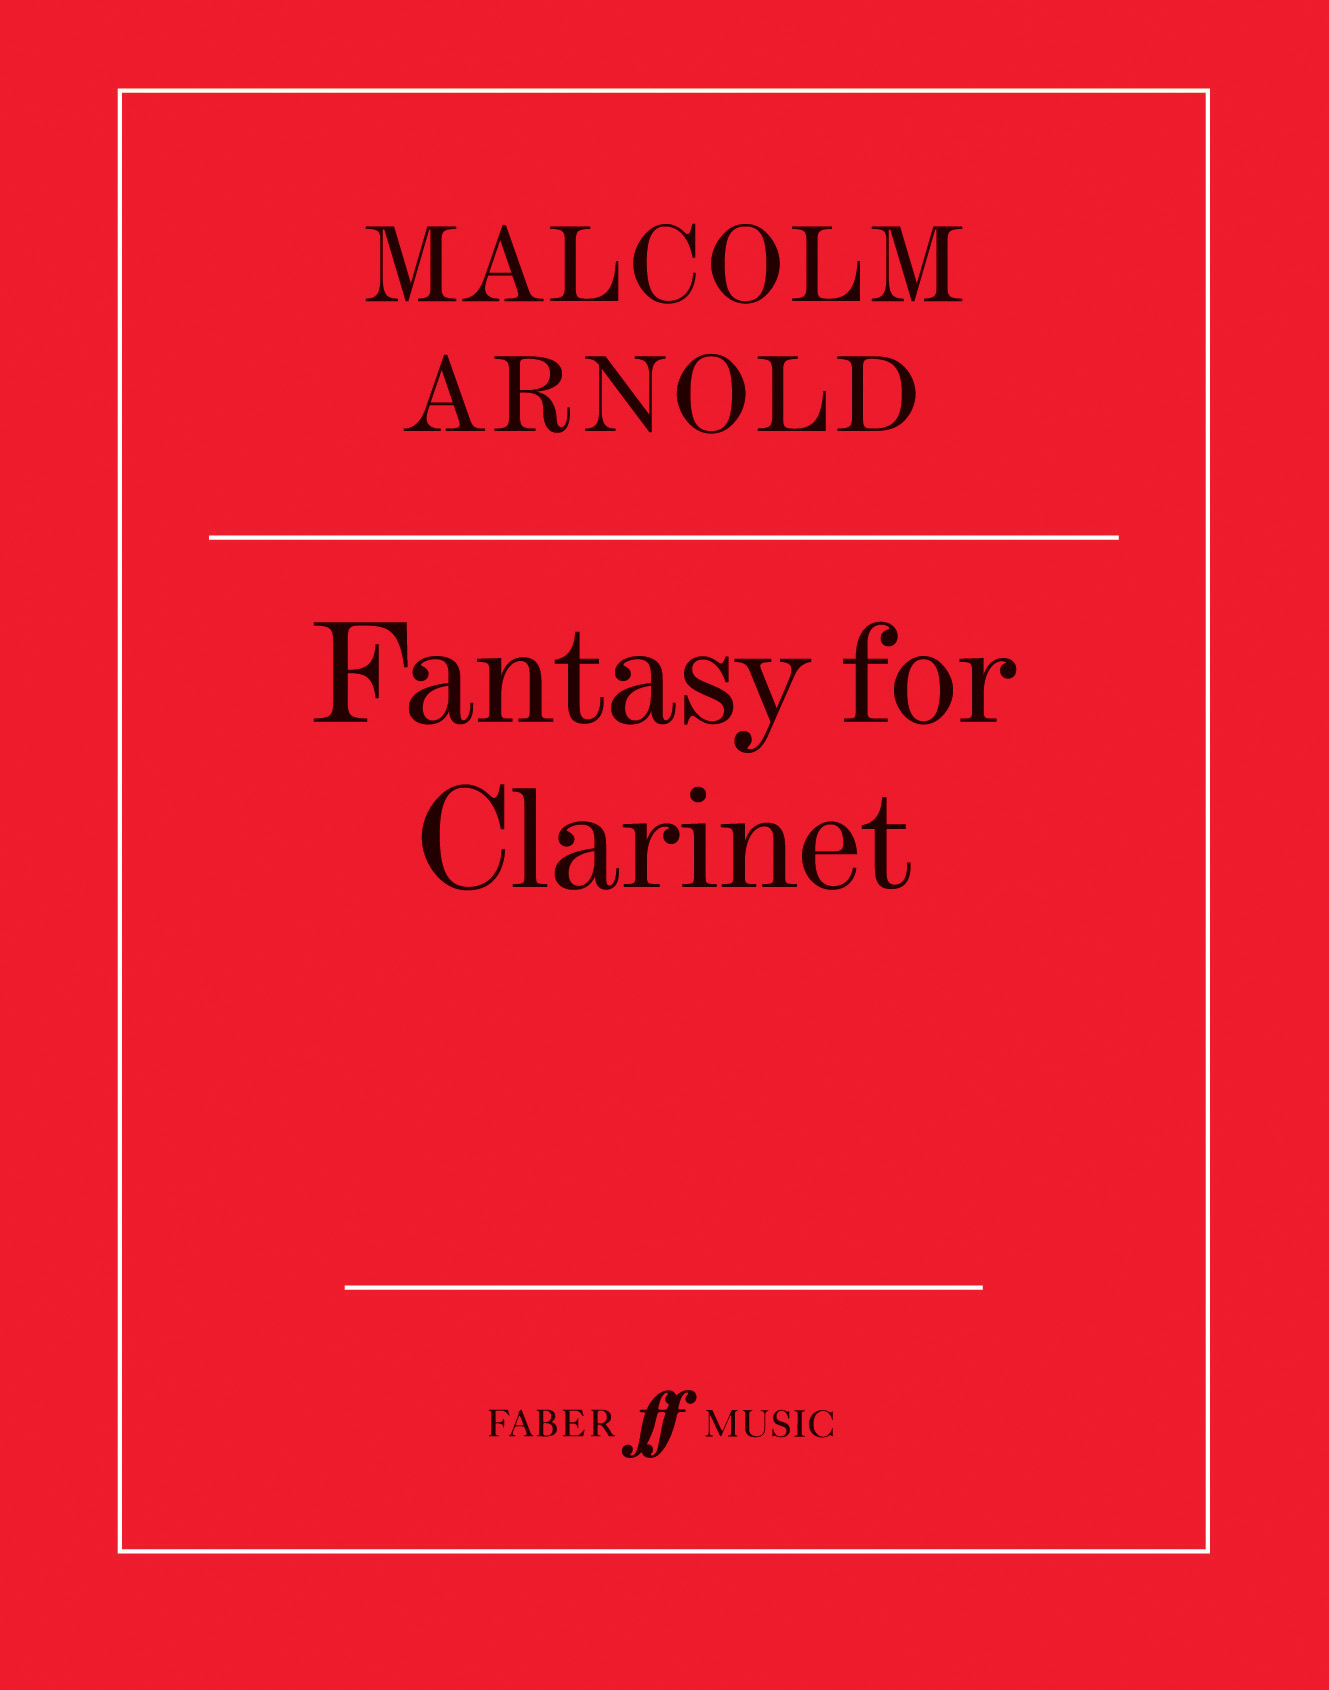 Arnold Fantasy For Clarinet Sheet Music Songbook